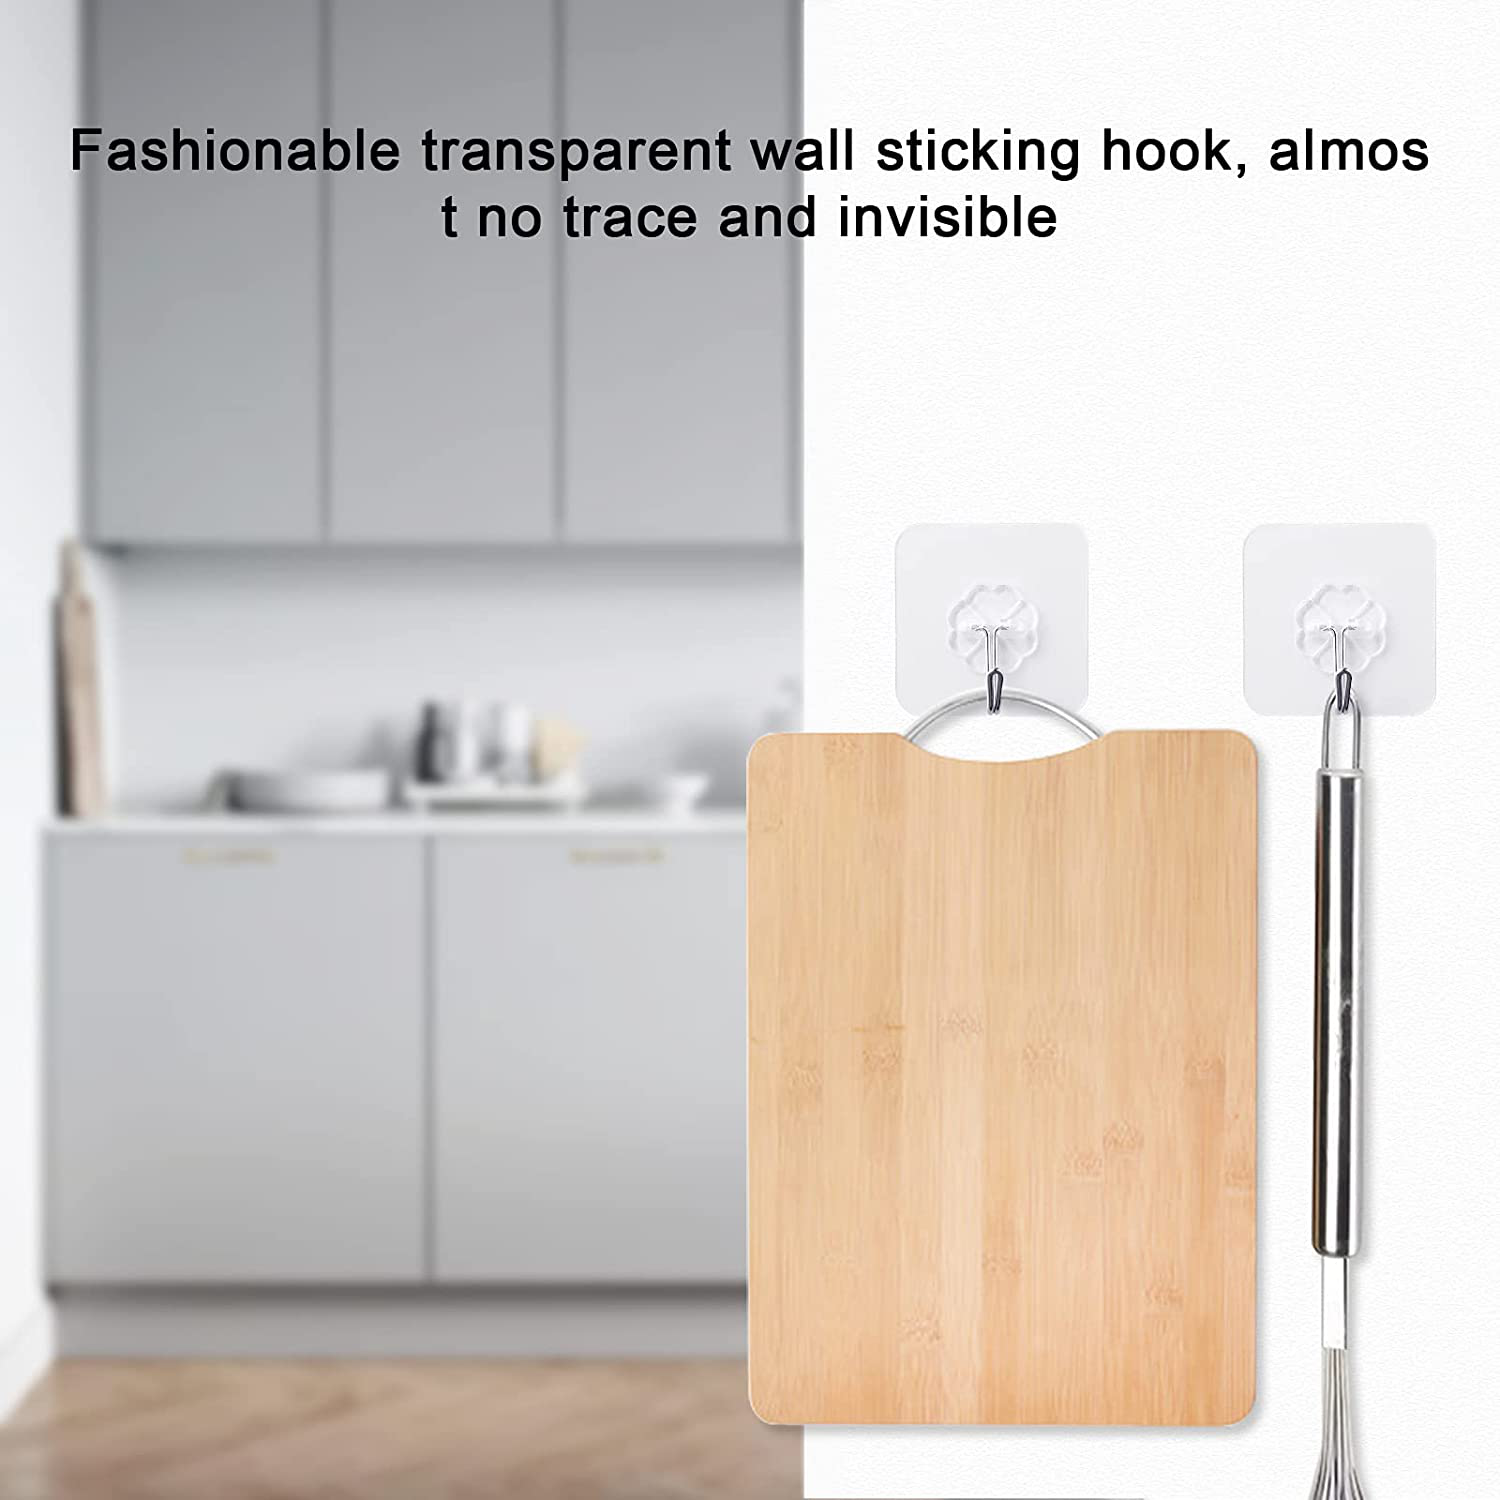 Angyues Adhesive Wall Hooks,20 Pieces Waterproof Oilproof Bathroom and Kitchen Heavy Duty Adhesive Hooks , Transparent Practical Wall Hook Coat Hooks, Ceiling Hooks for Hanging Plants13 Pounds (Max)